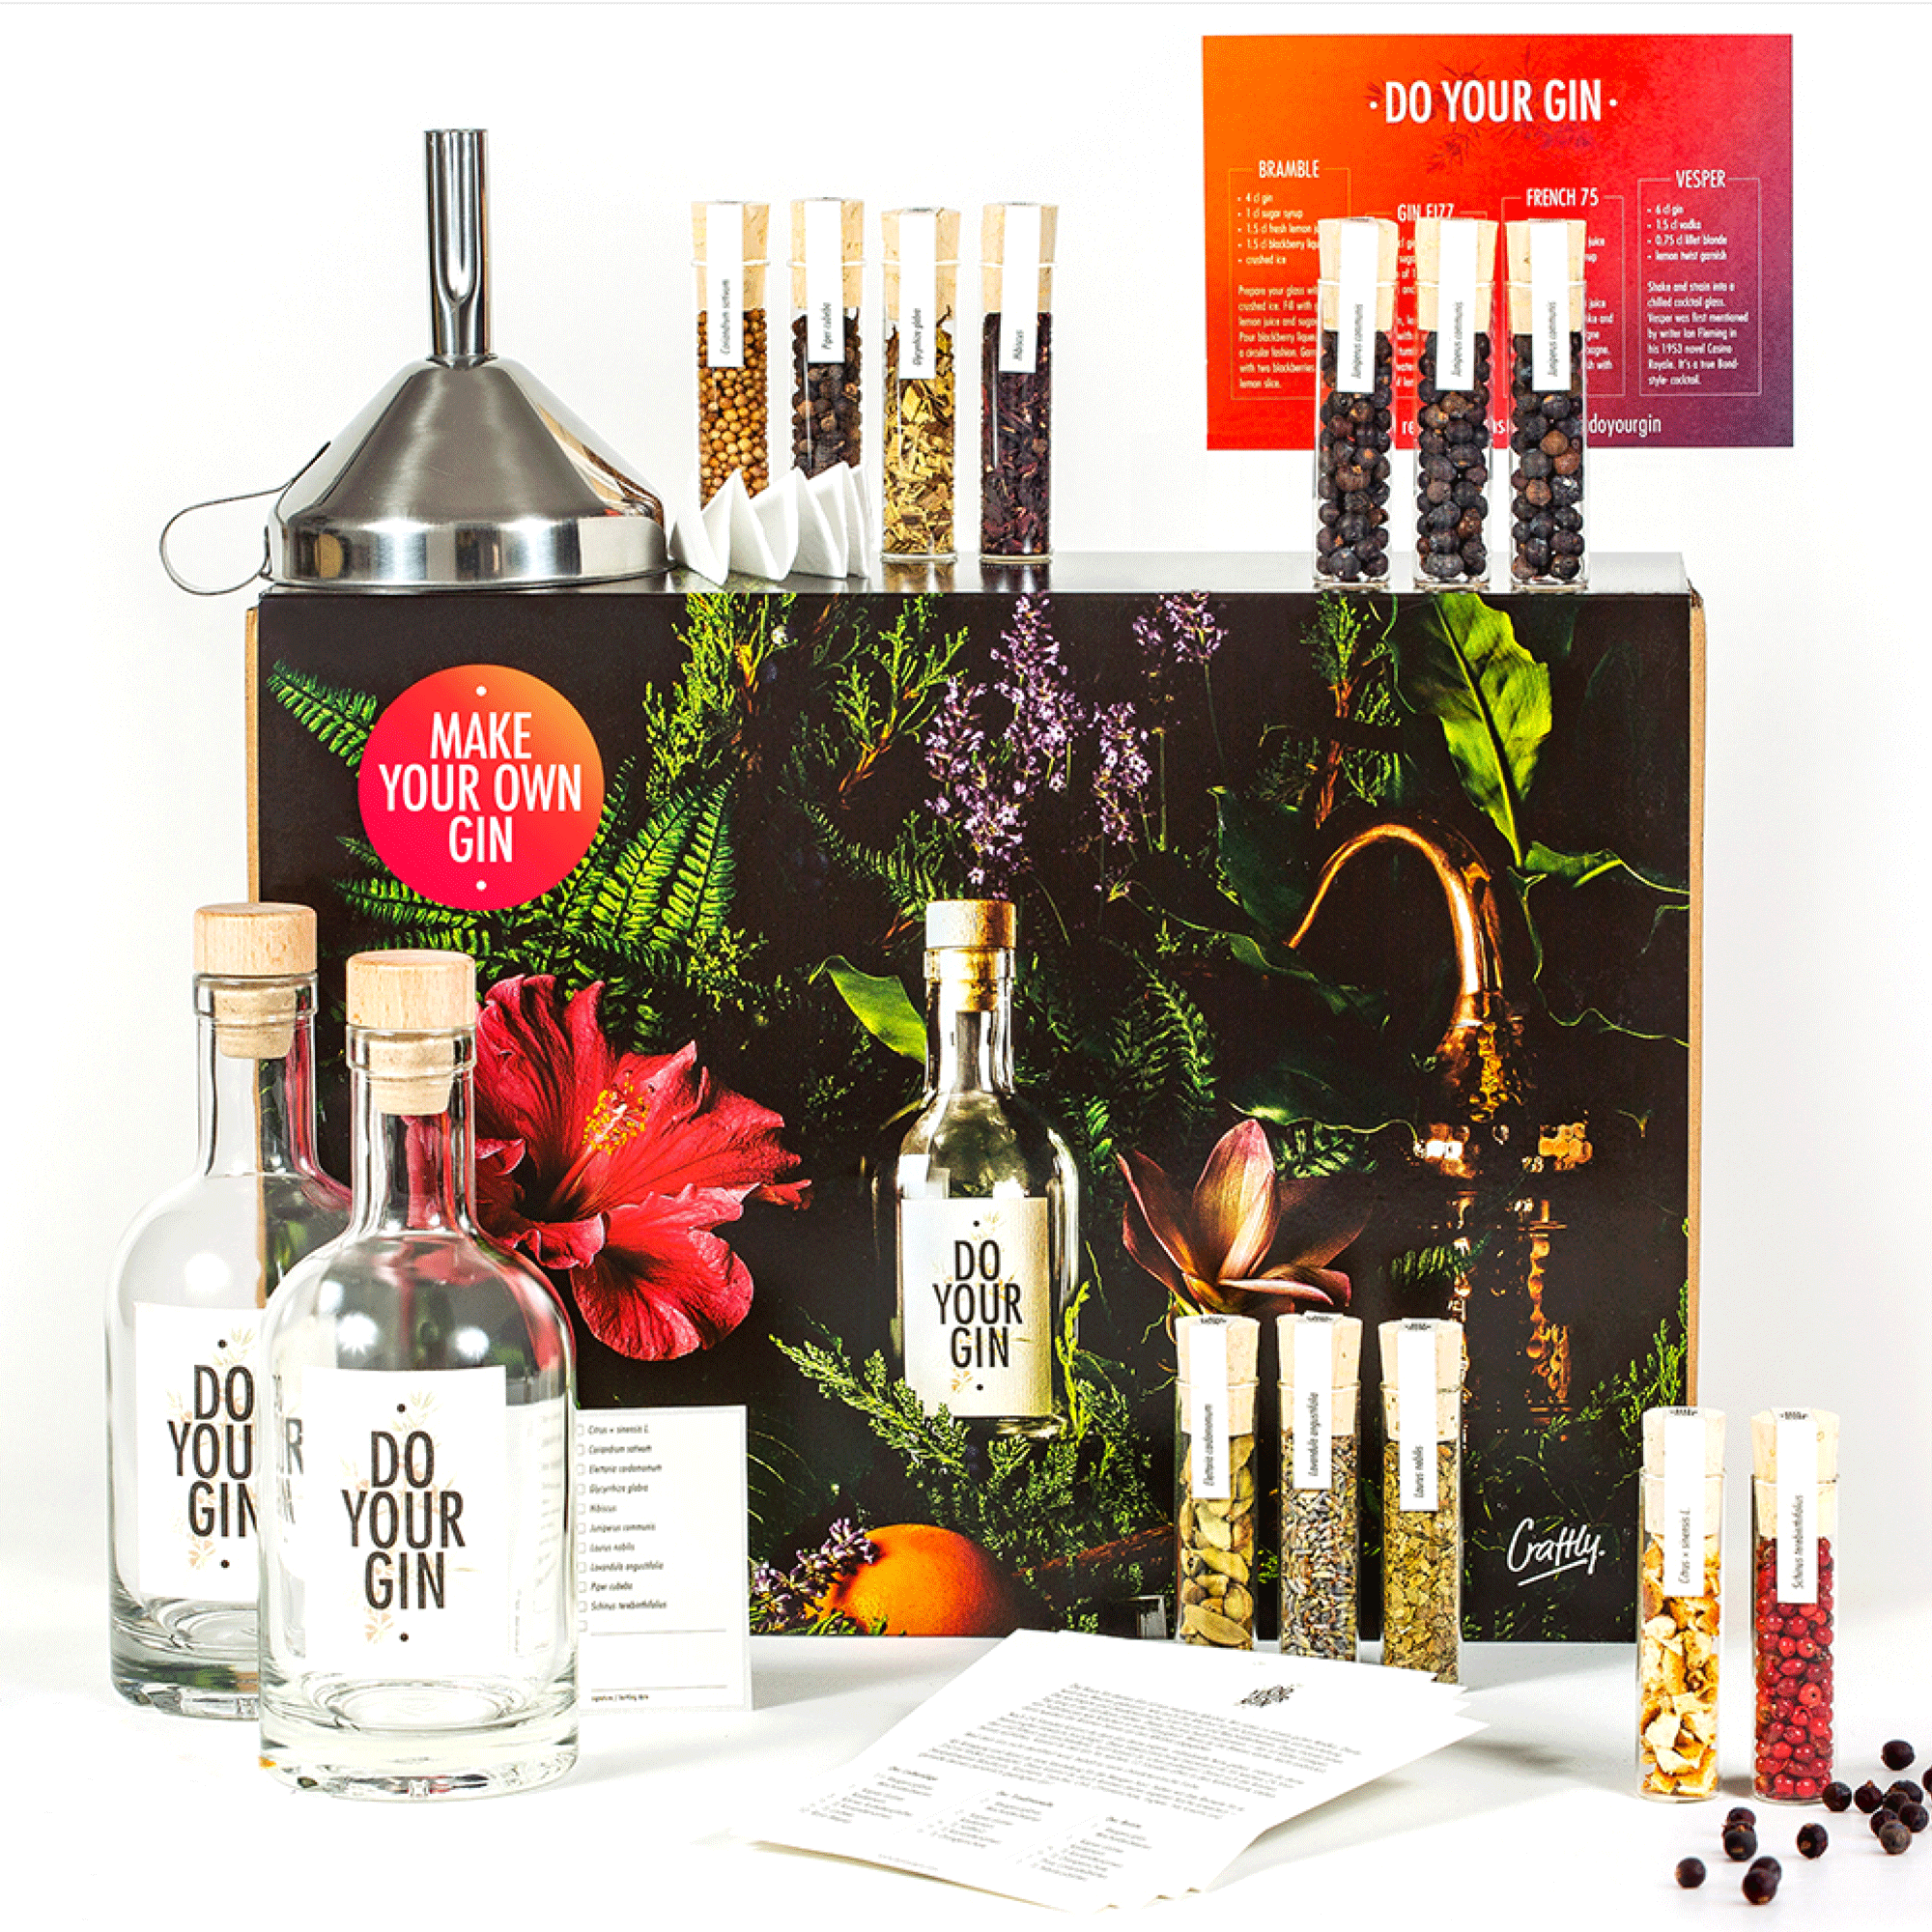 Gin Infusion Kit – Craftly US